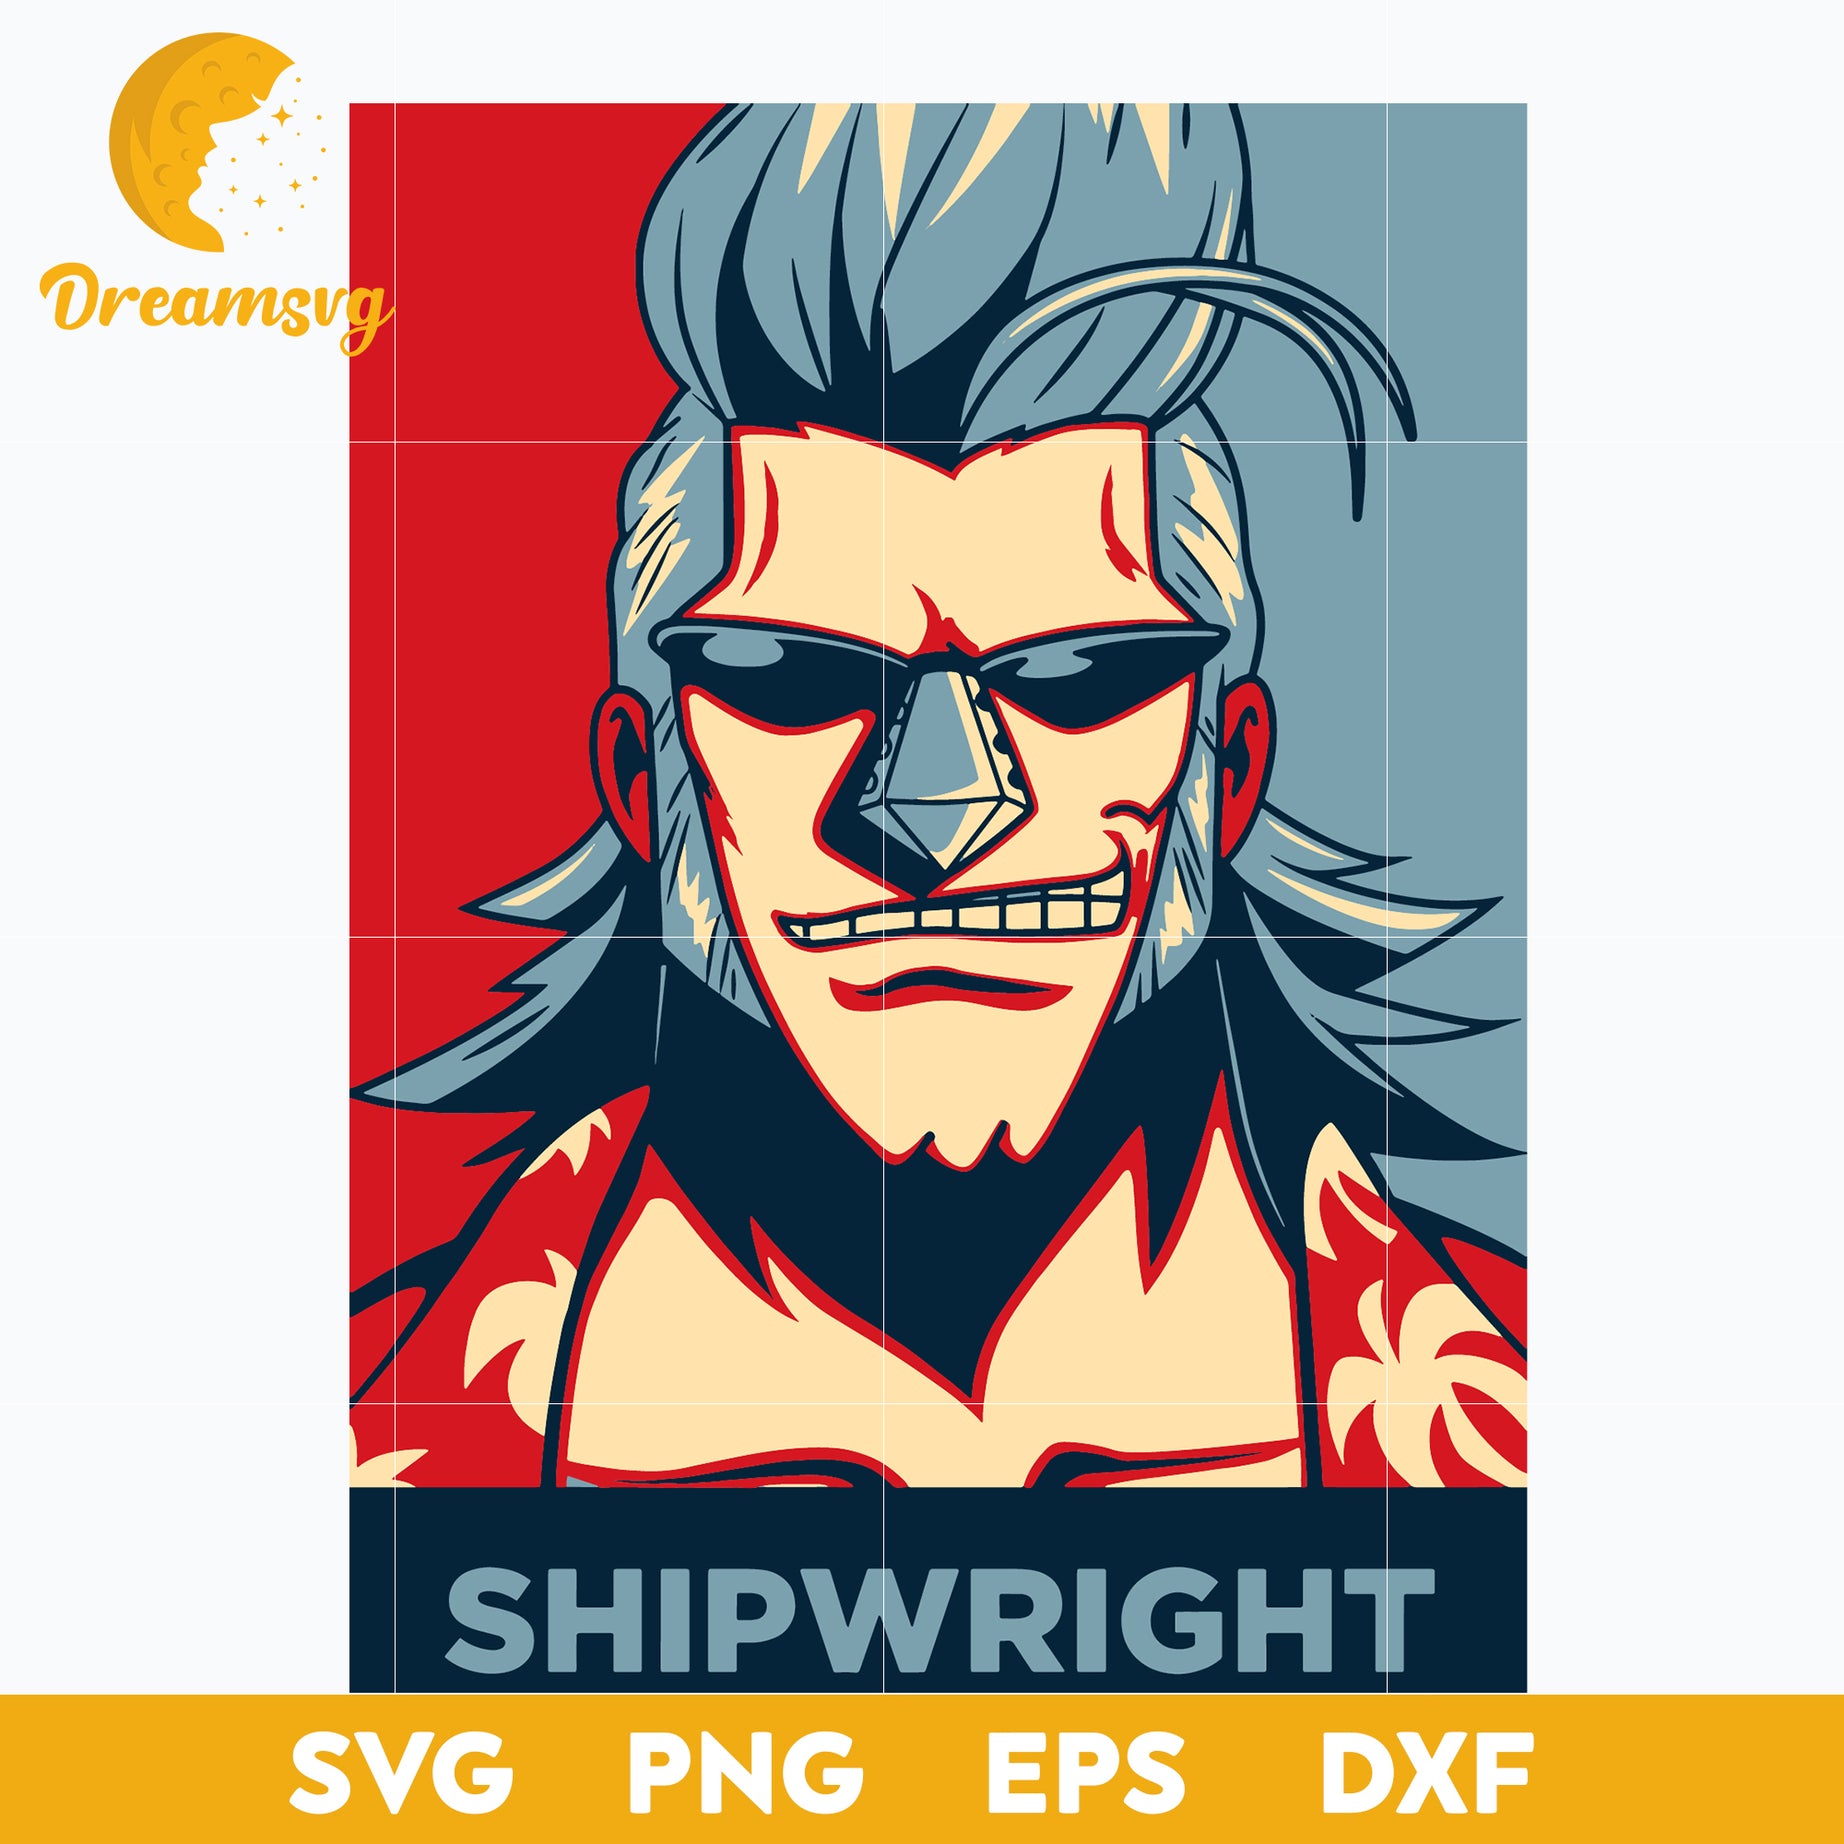 Franky Shipwright One Piece Svg, Franky One Piece Svg, Franky Svg, One Piece Anime Svg,file for cricut, Anime svg, png, eps, dxf digital download